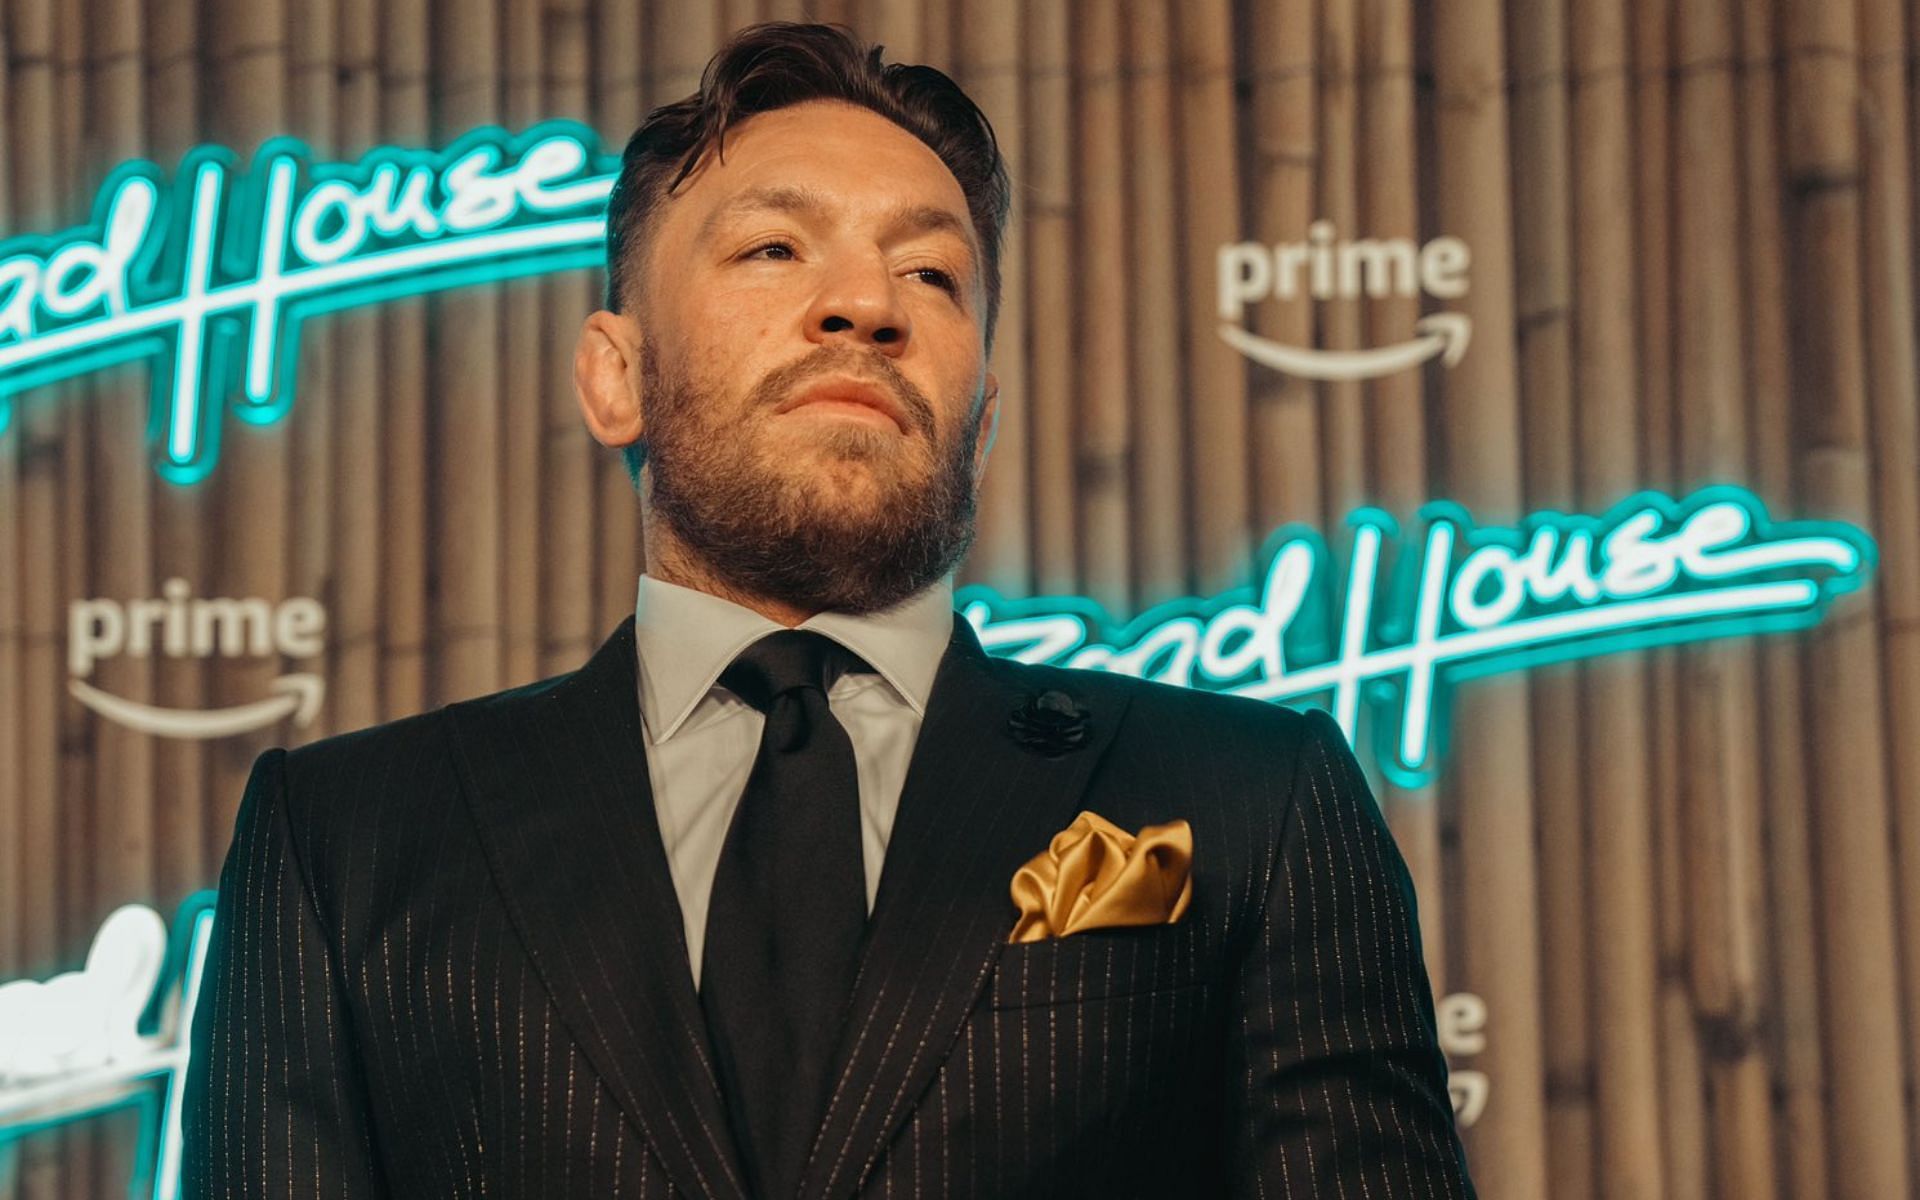 Conor McGregor at the premiere of Road House (2024) (Image Courtesy - @TheNotoriousMMA on X/Twitter)